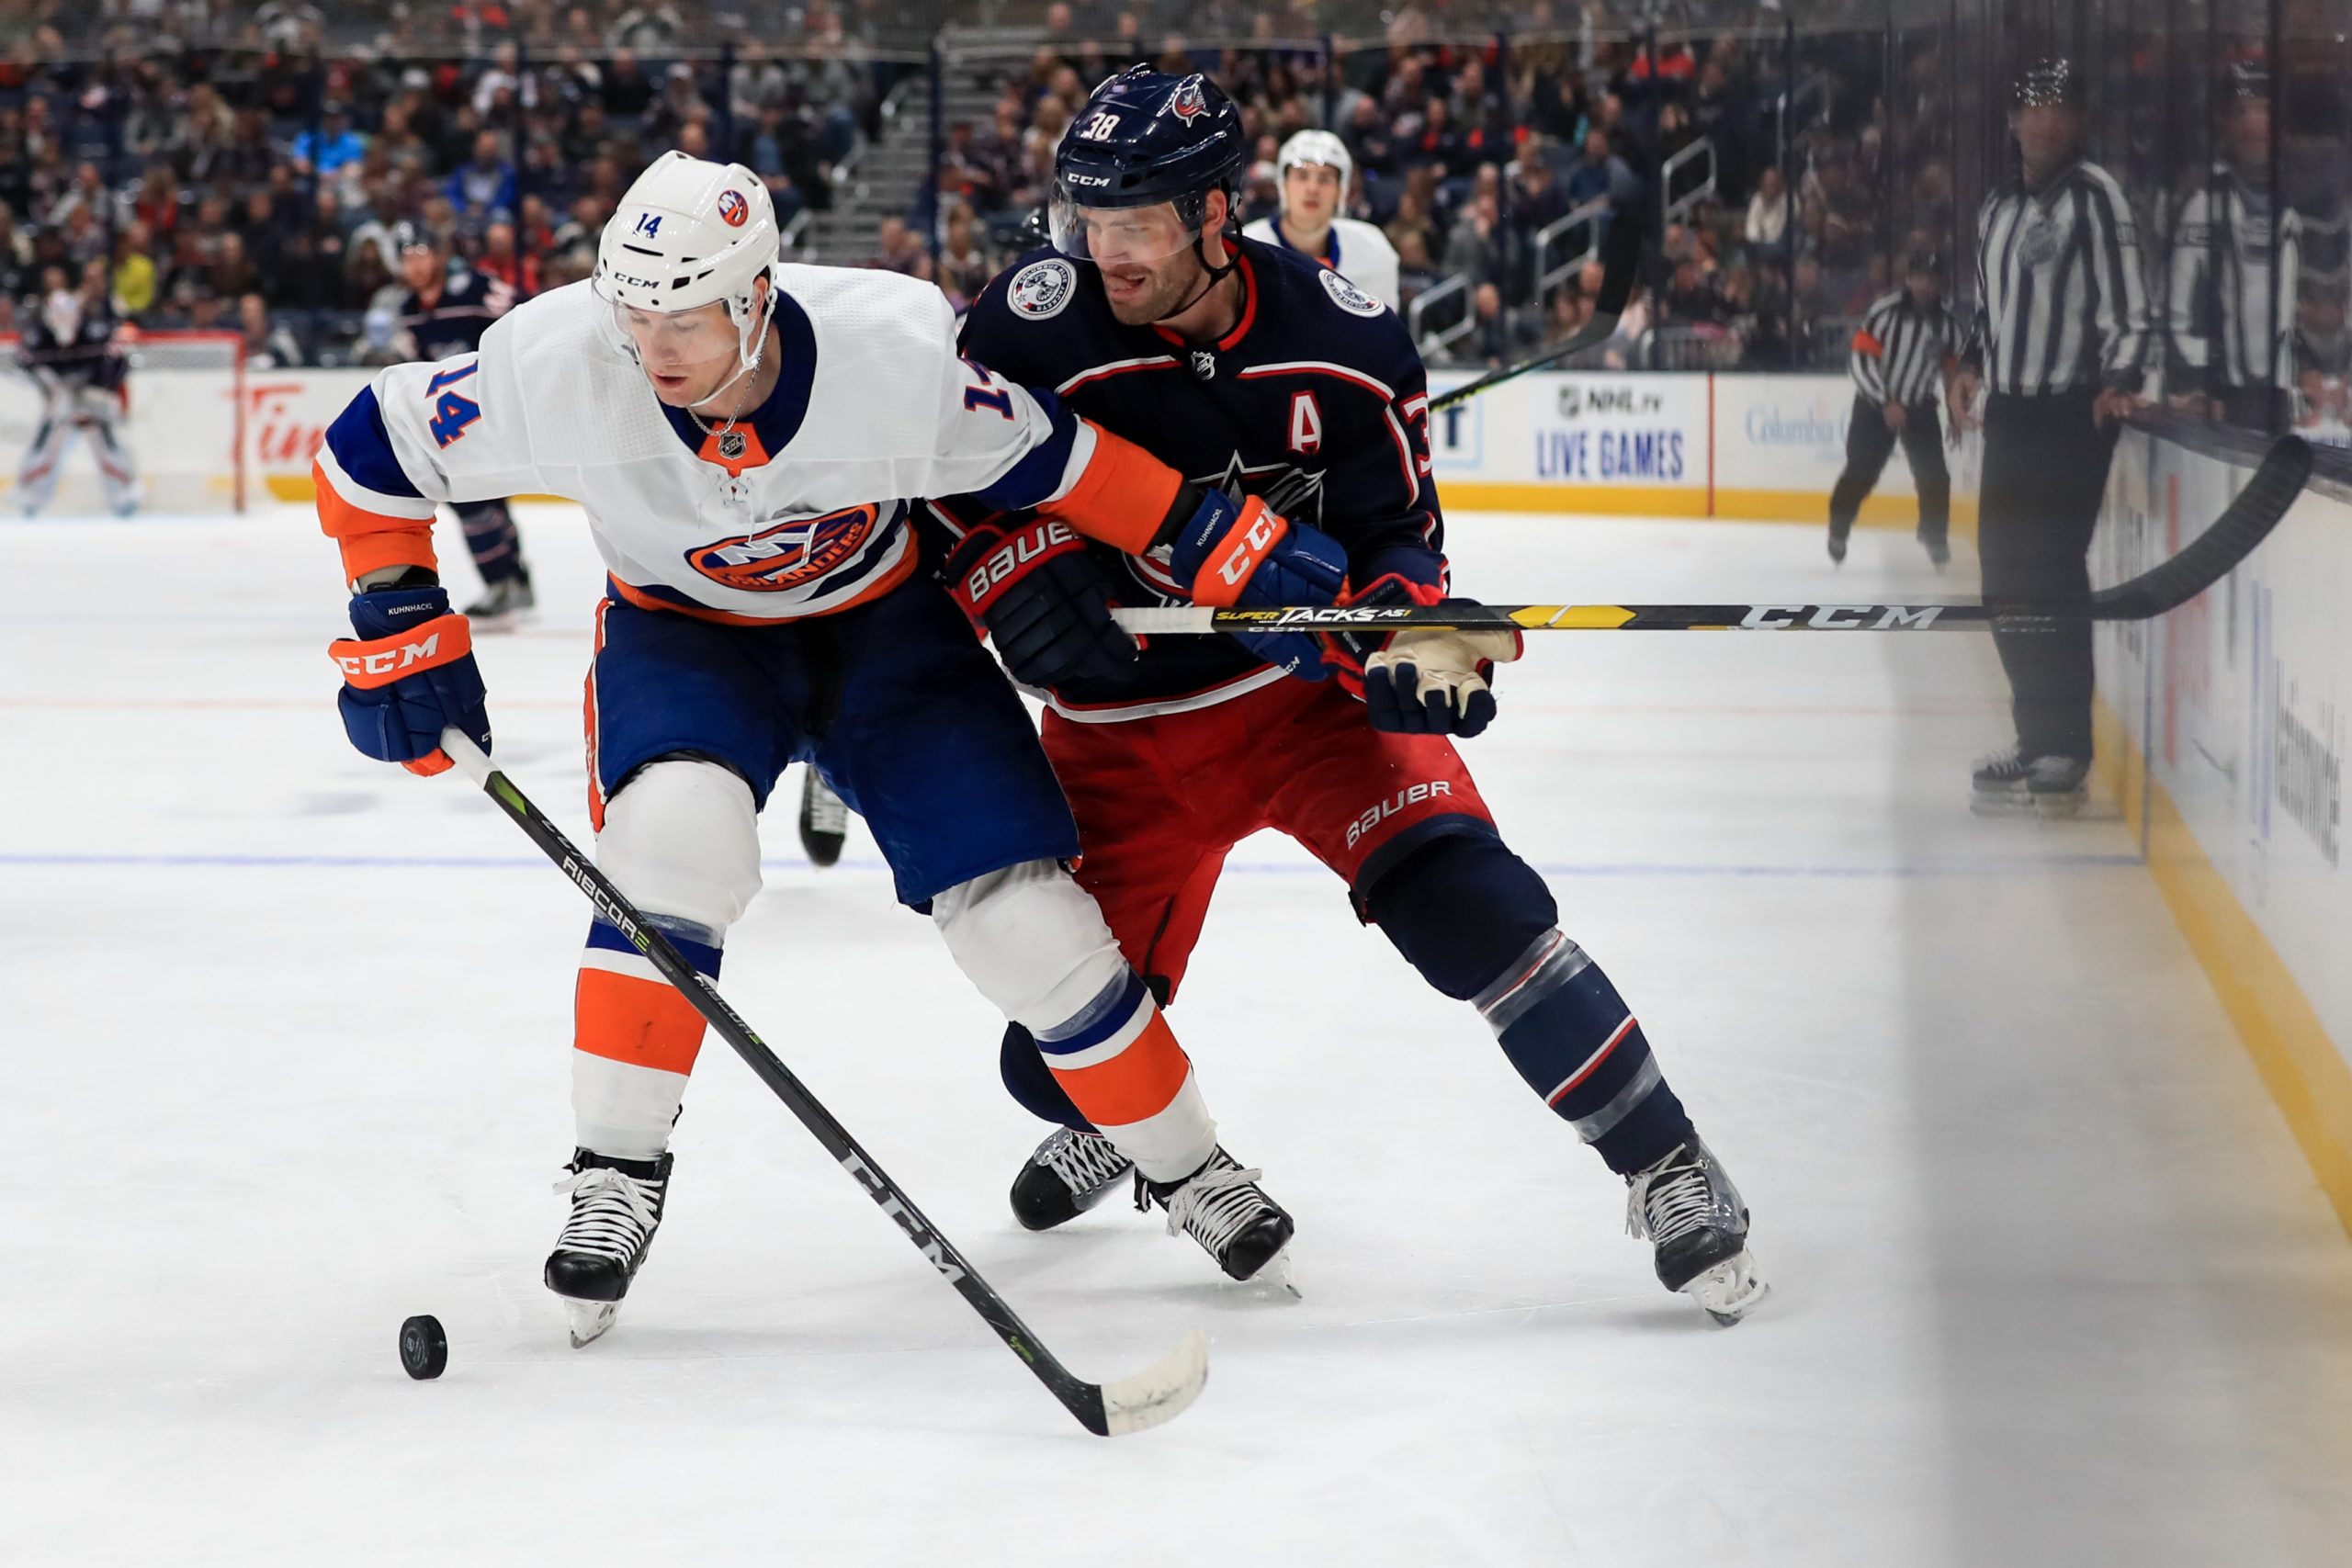 Oct 19, 2019; Columbus, OH, USA; New York Islanders right wing Tom Kuhnhackl (14) skates against Columbus Blue Jackets center Boone Jenner (38) in the second period at Nationwide Arena. Mandatory Credit: Aaron Doster-USA TODAY Sports